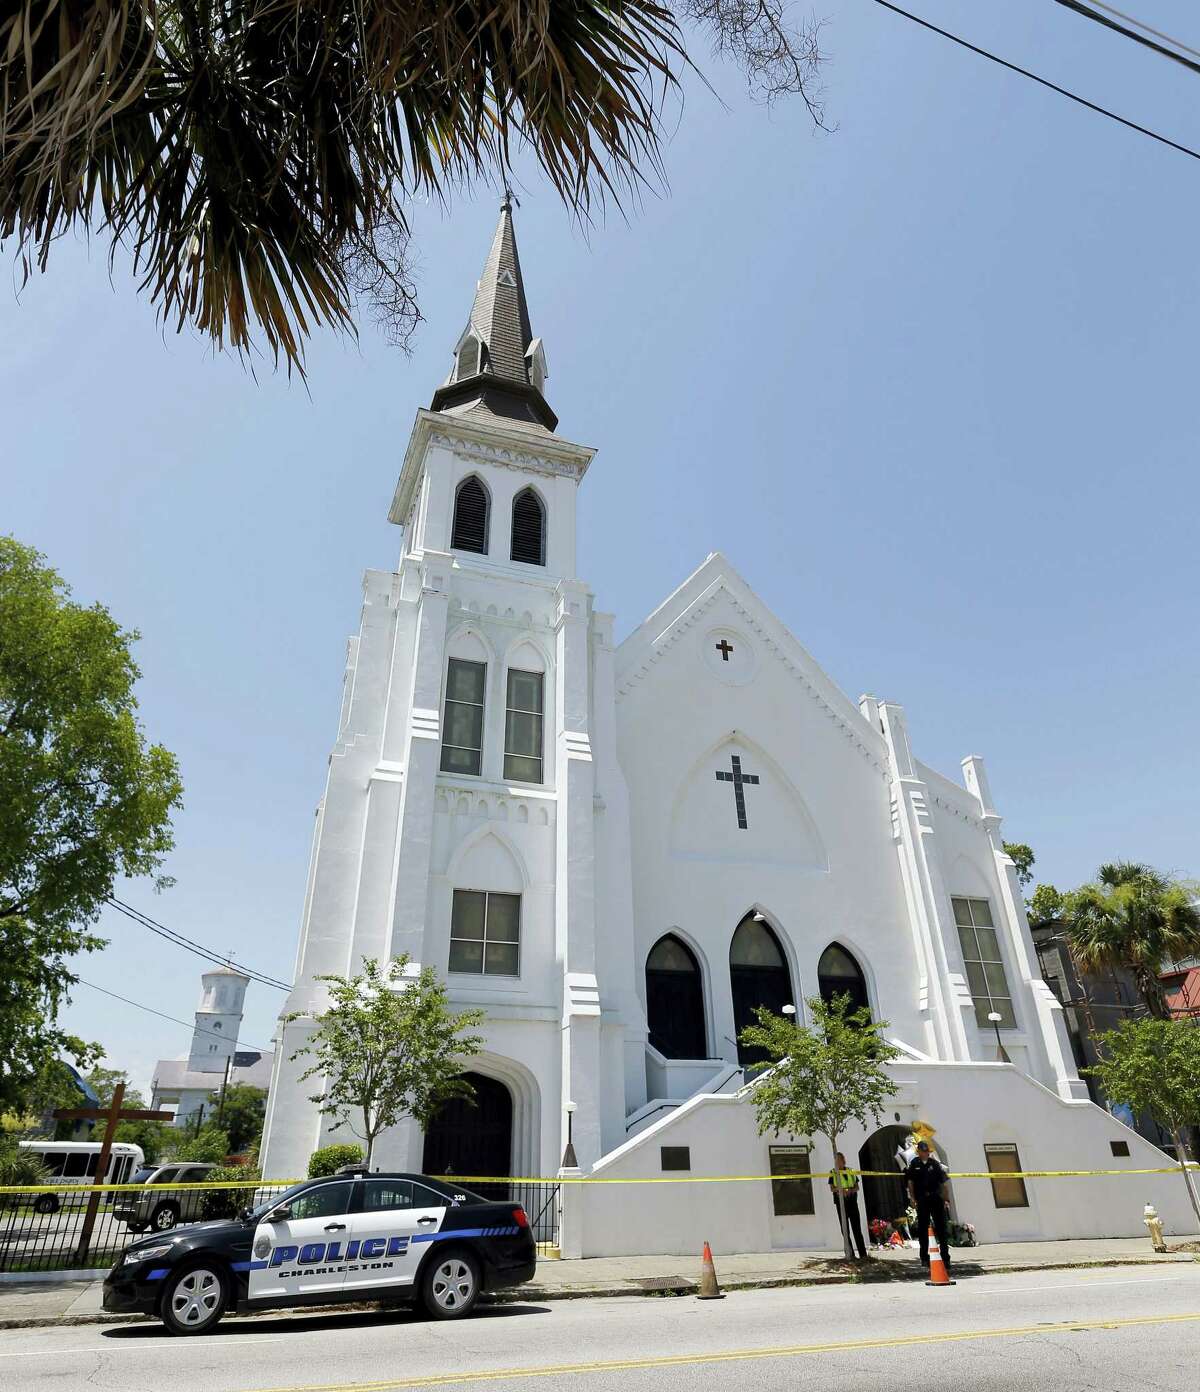 Two Charleston police officers stand in front of the Emanuel AME Church, Thursday, June 18, 2015, following a shooting Wednesday night in Charleston, S.C.